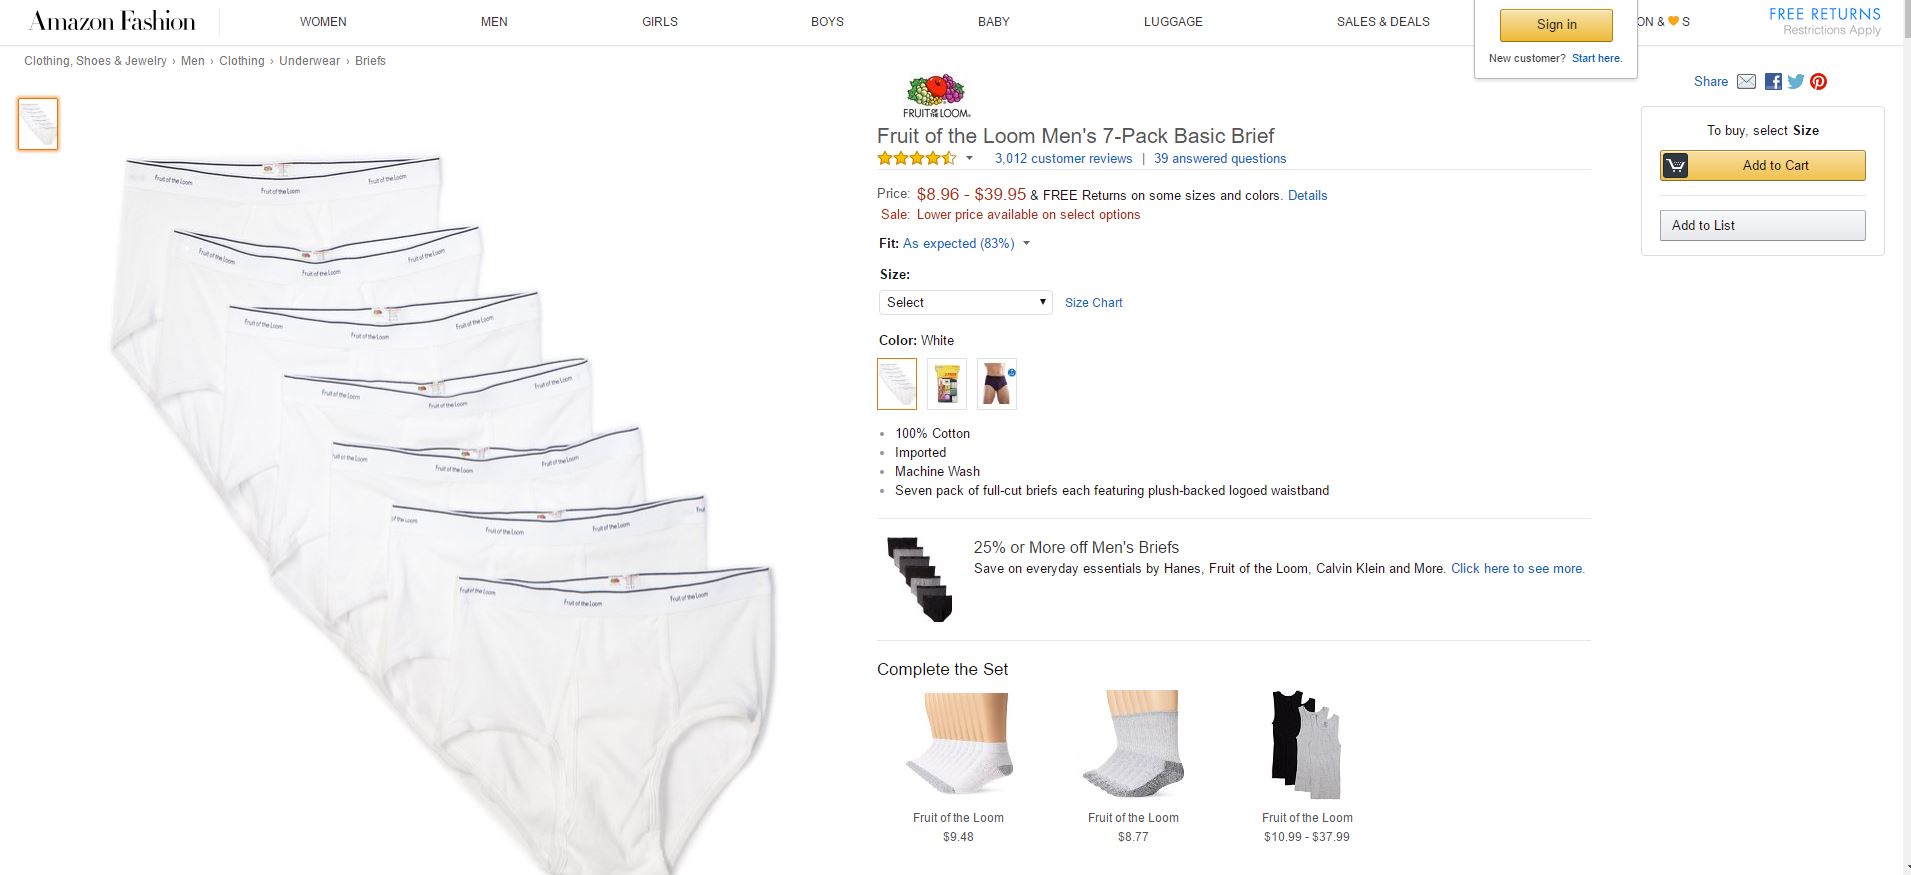 Why men's underpants are 28% more profitable than women's